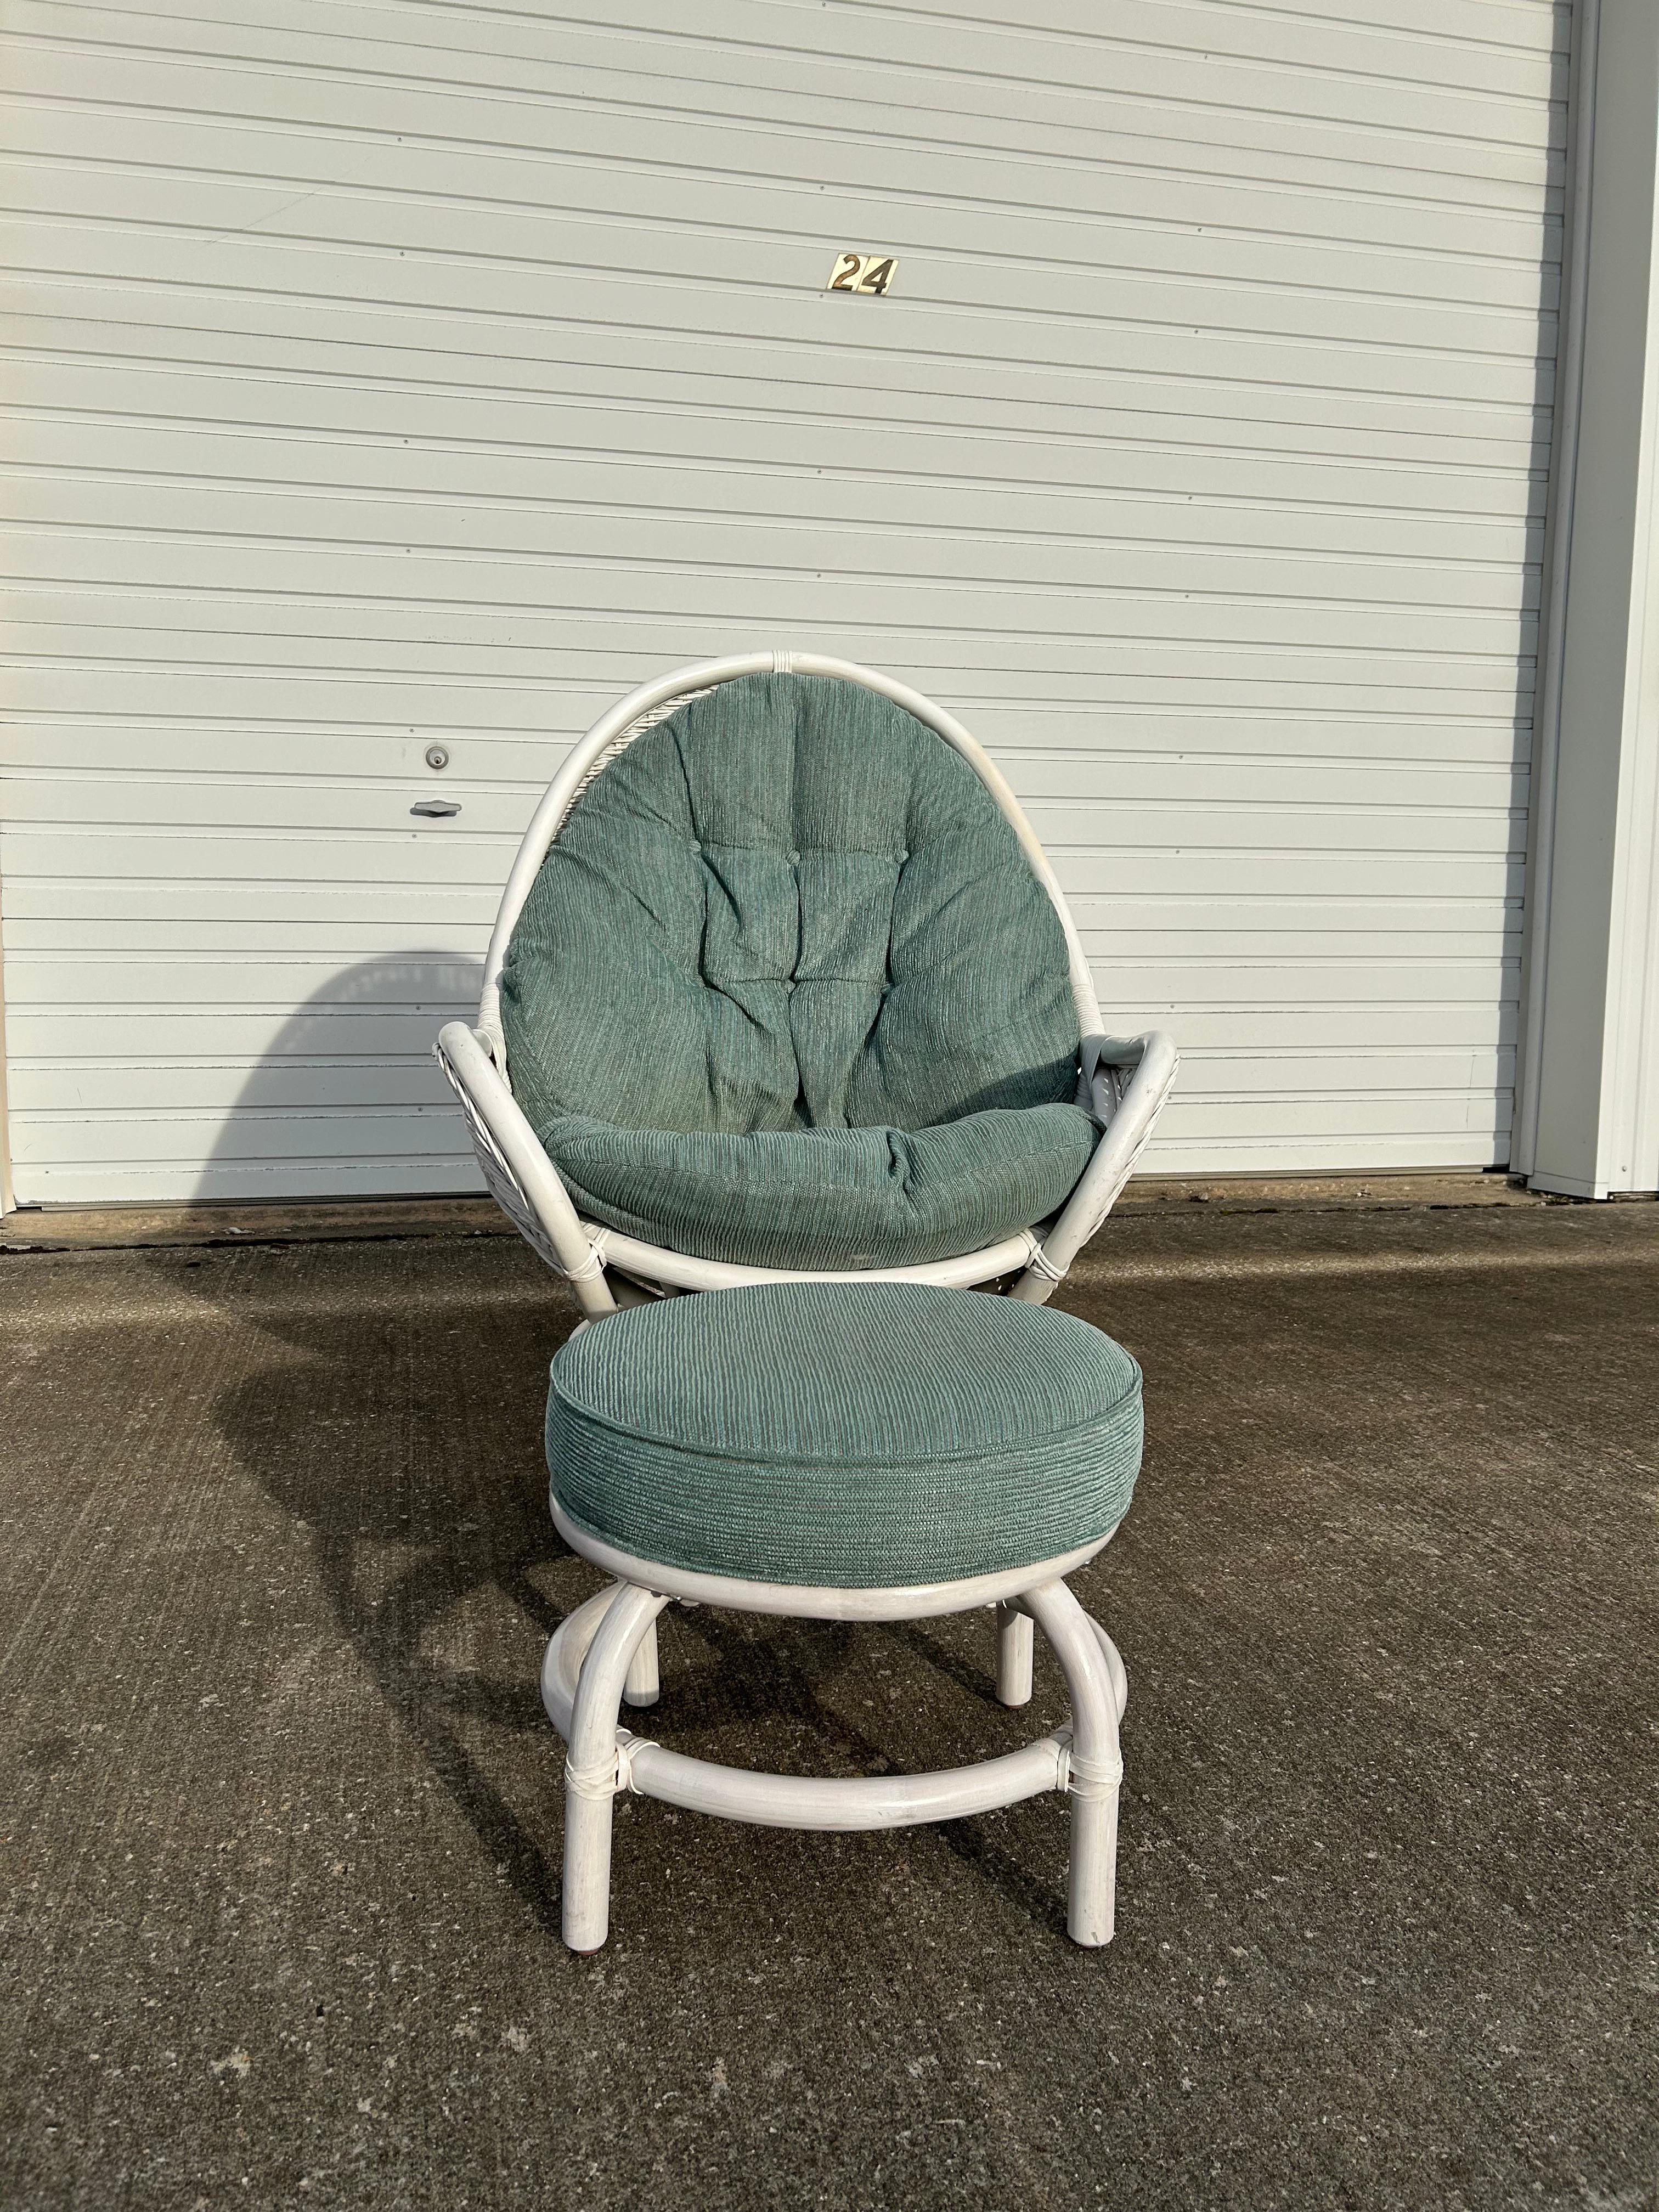 Rare and hard to find White Rattan Upholstered Egg Chair with Ottoman. The chair swivels and reclines when you sit back in it. See video for a full presentation of it. The upholstery is still in its original fabric and has not been changed. It does